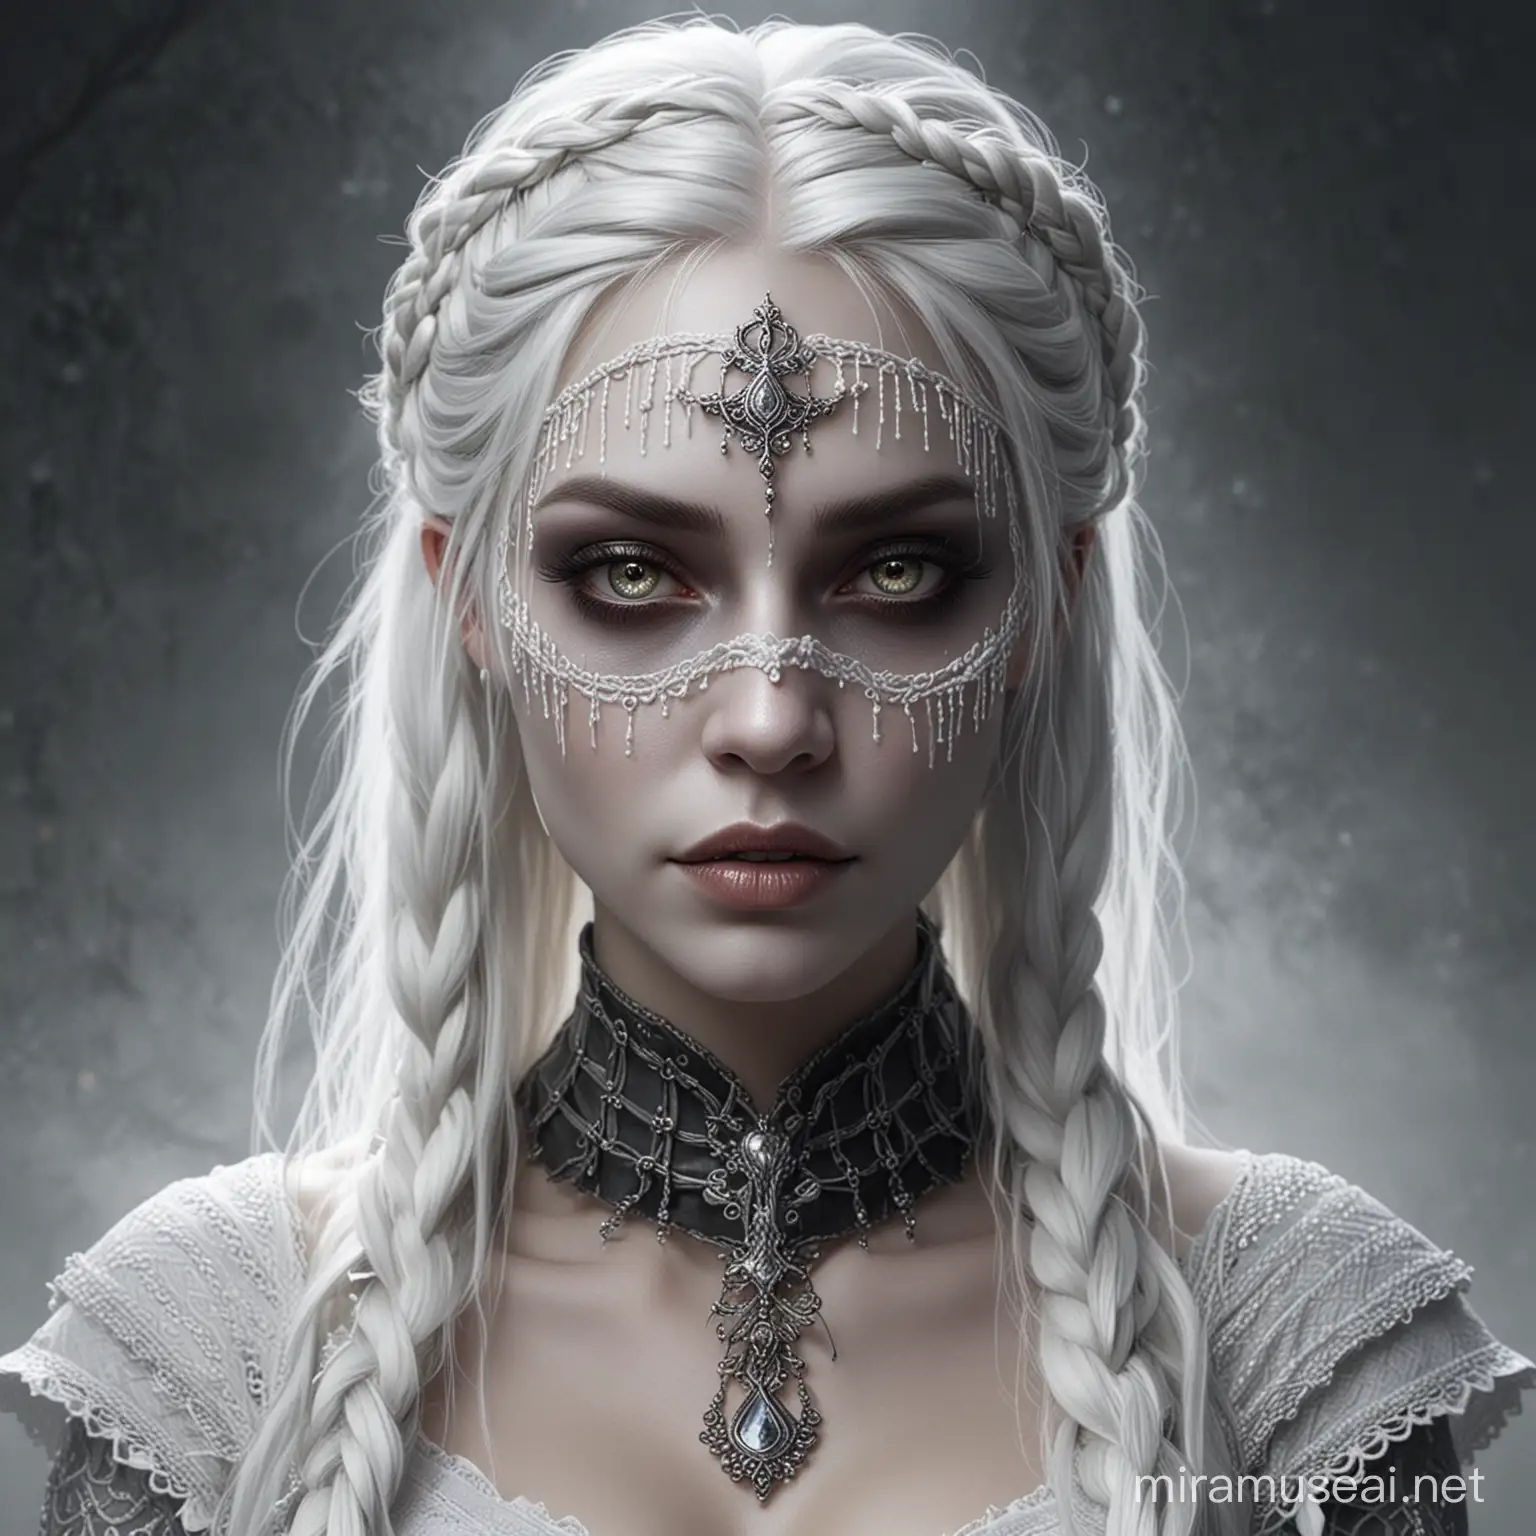 fantasy art of noble female Drow with white skin and white braided hair, wearing a gauze wrapping around her blind eyes
